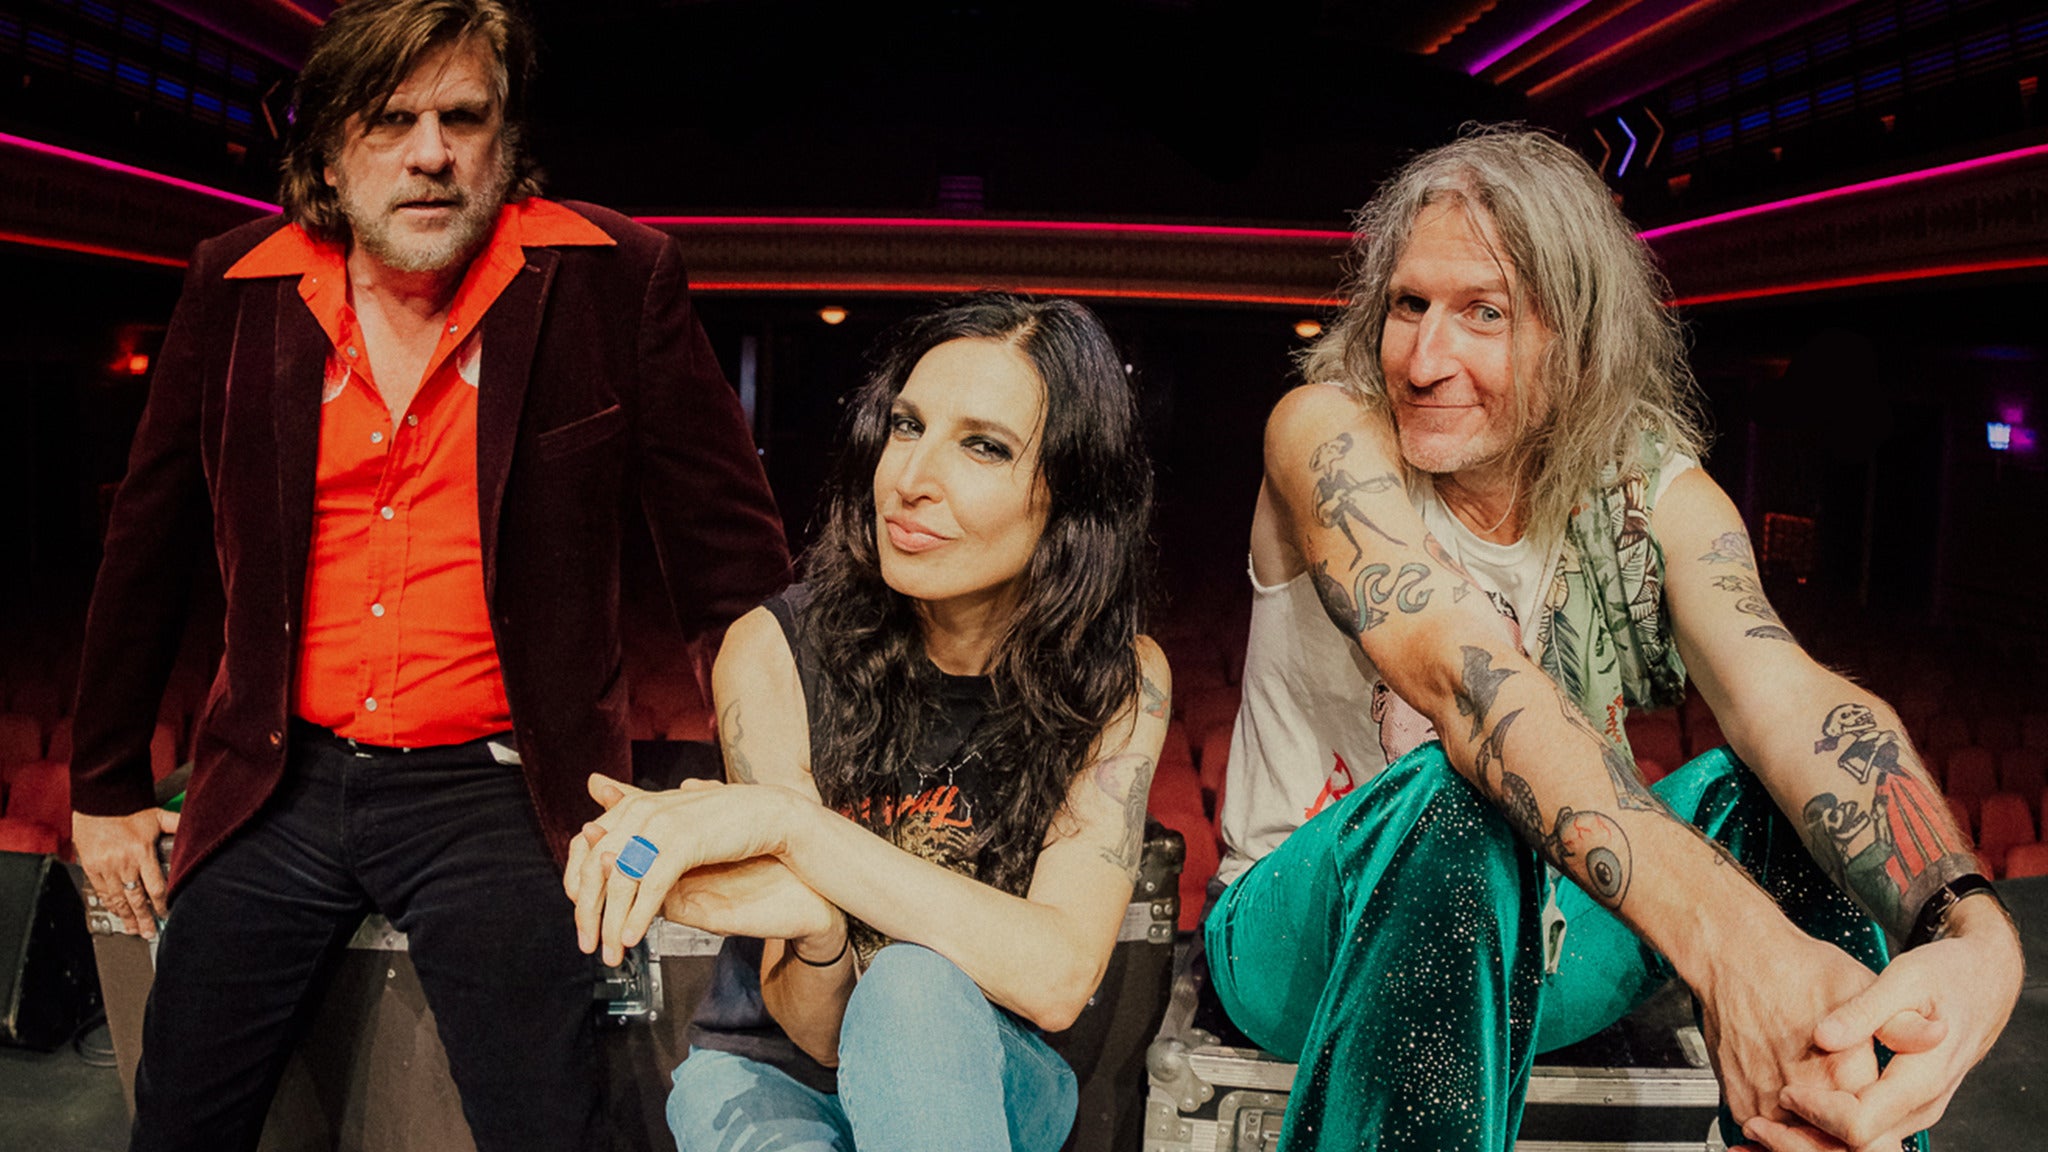 Image used with permission from Ticketmaster | The Rolling Stones Revue Featuring Adalita, Tex Perkins and Tim Rogers tickets